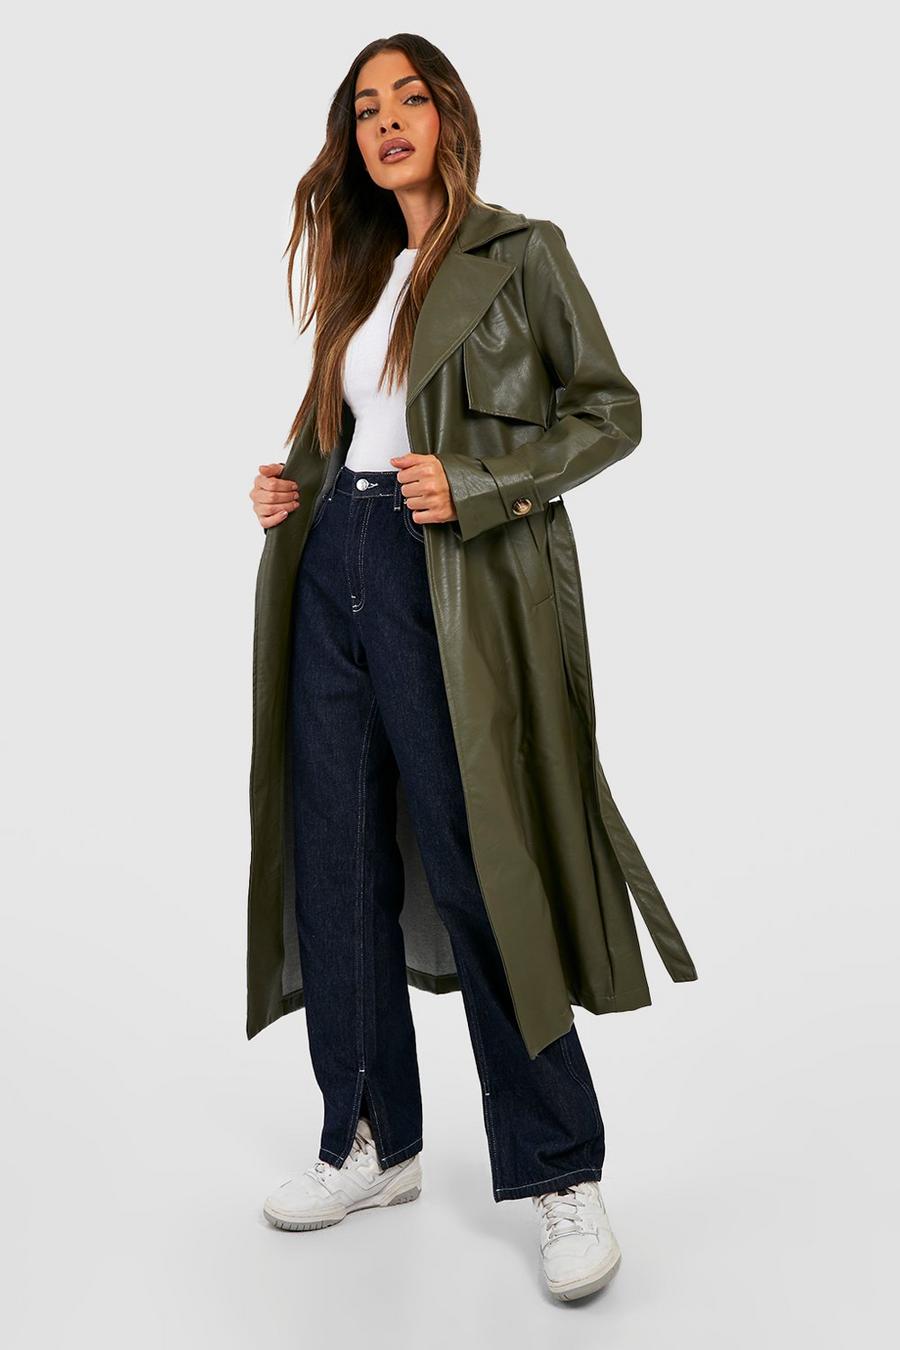 Topshop Belted Faux Leather Trench Coat